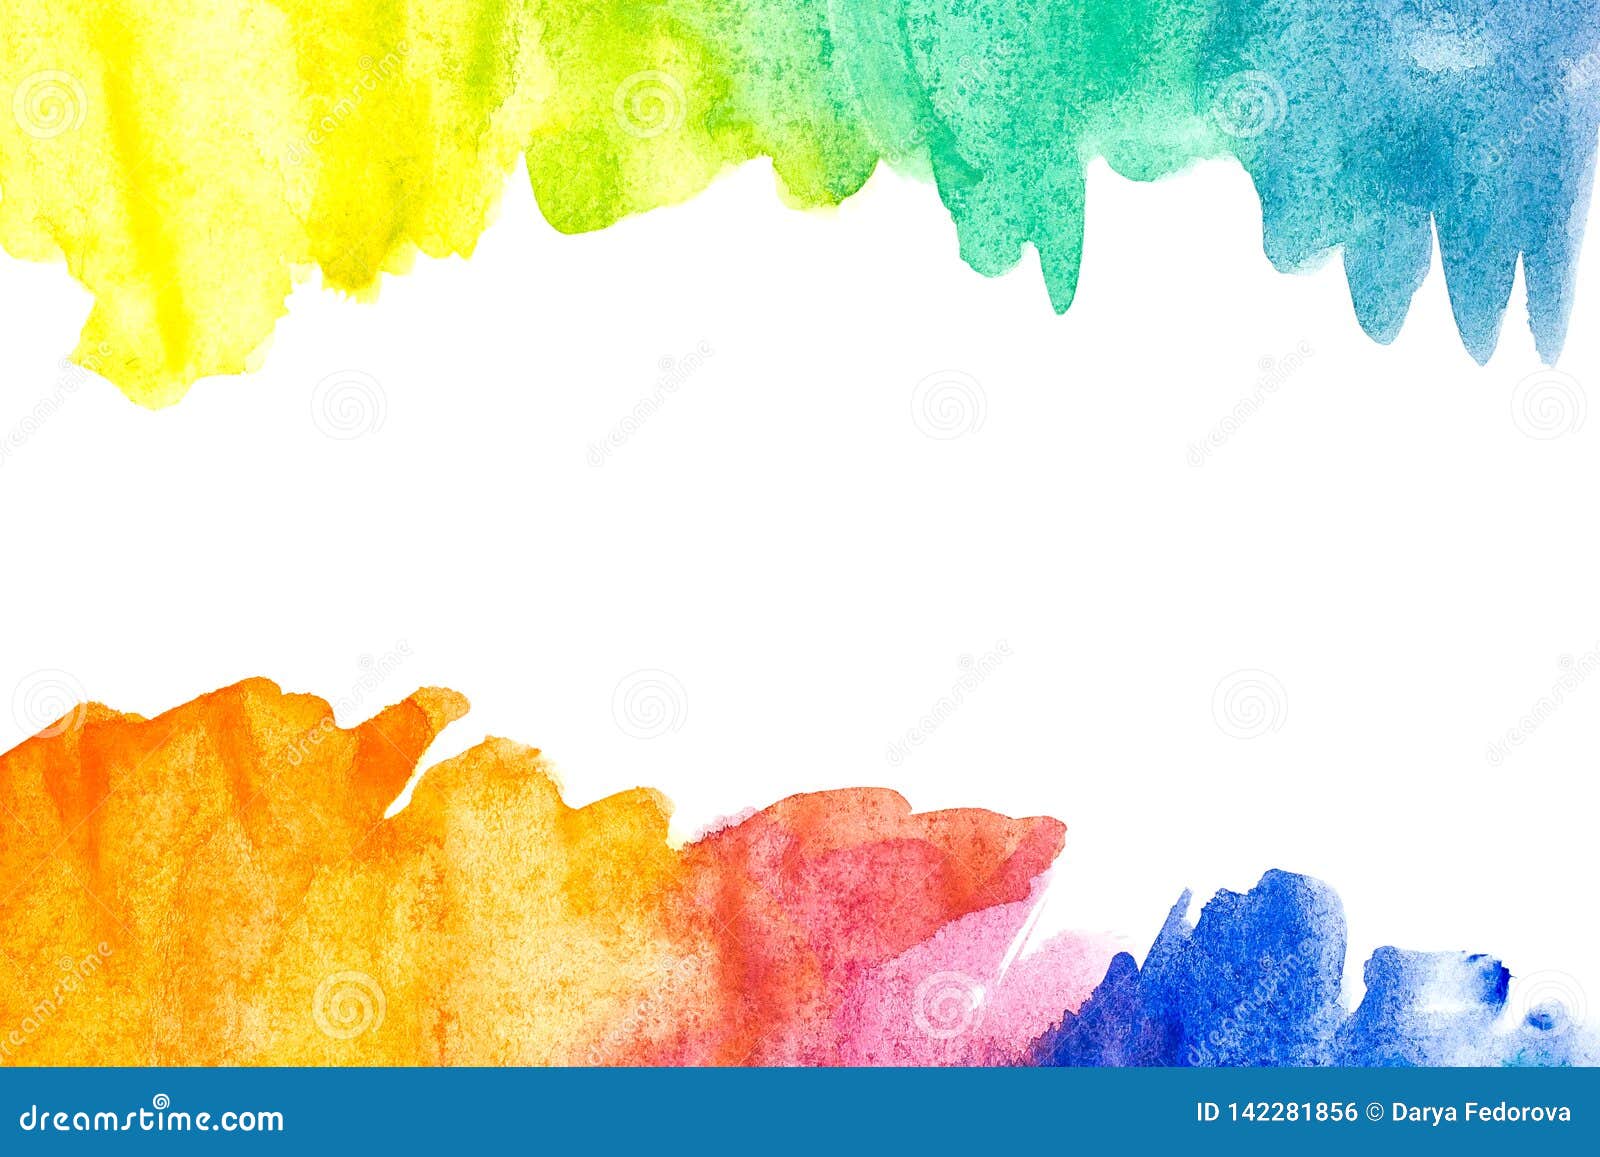 Border Of Abstract Watercolor Art Hand Paint On White Background. Watercolor Background Stock Photo - Image Of Rough, Texture: 142281856